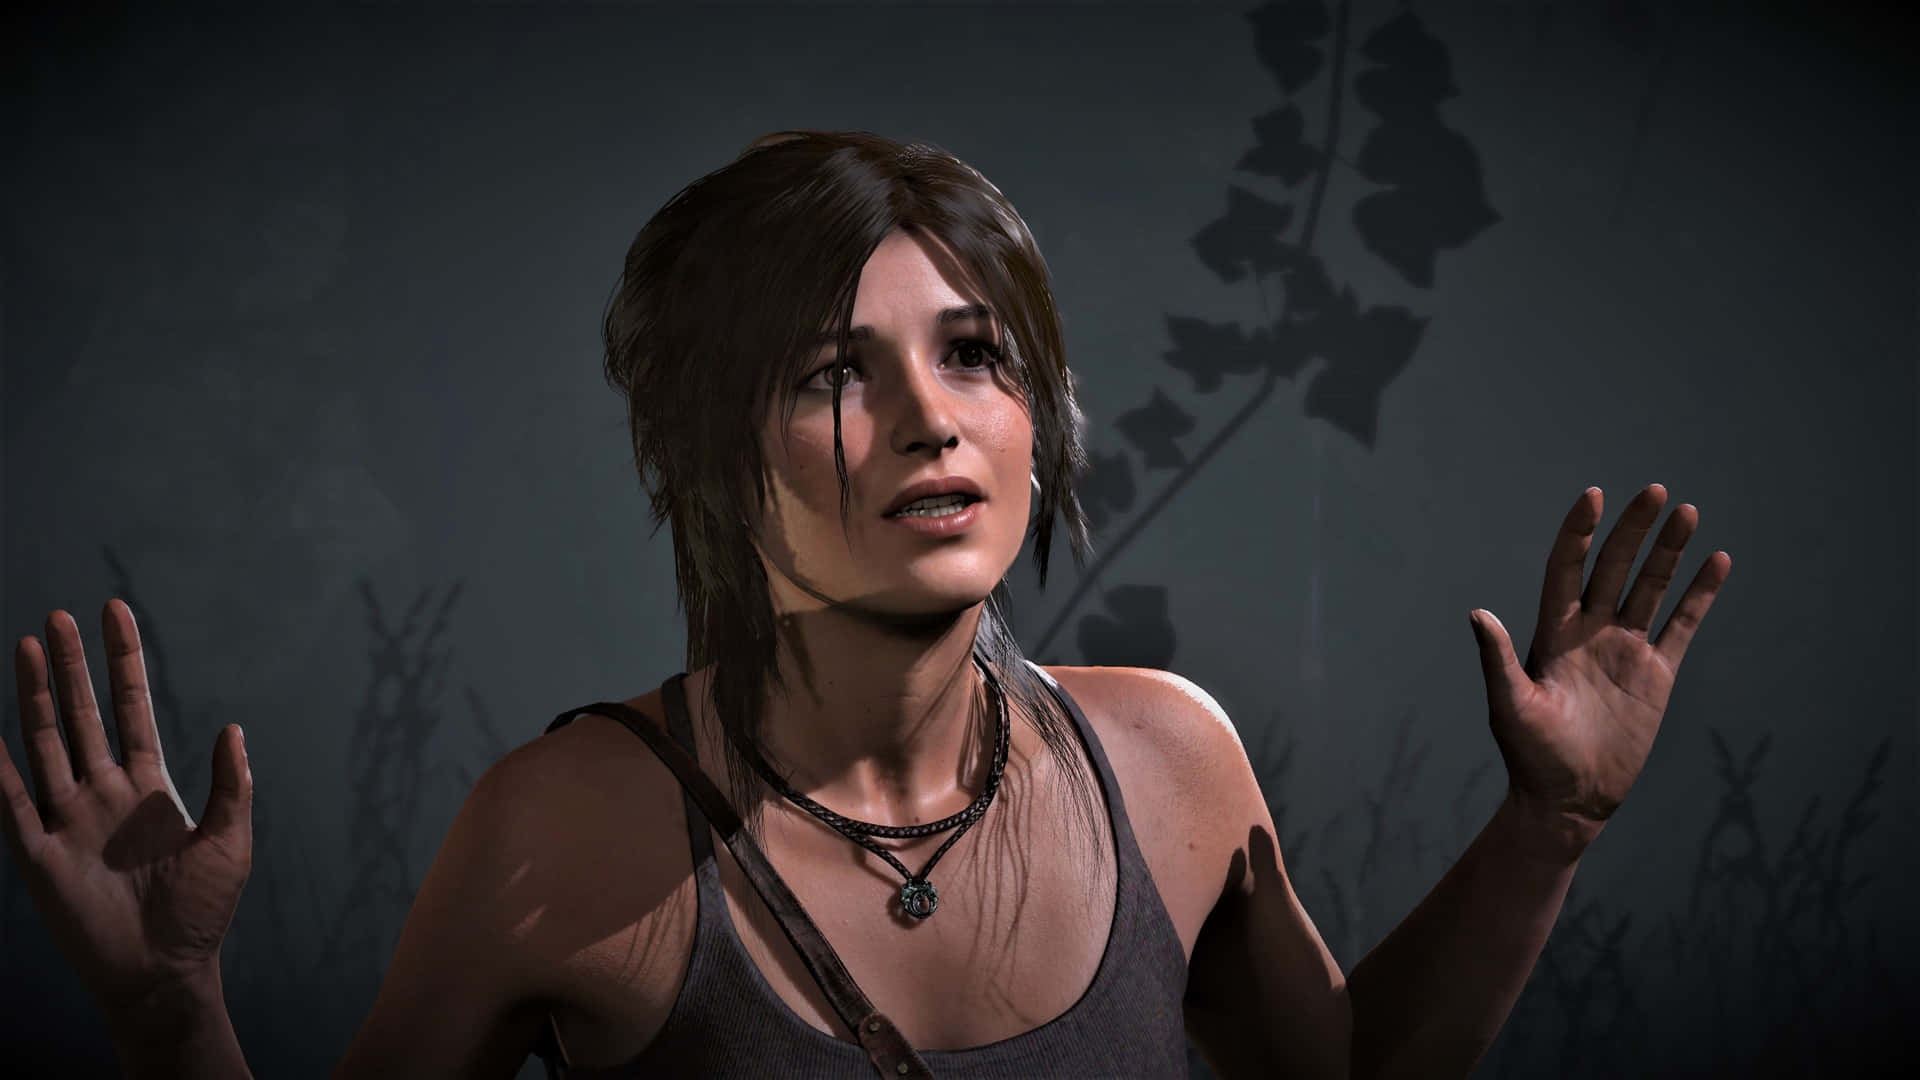 Lara Croft returns to face new challenges in Shadow of the Tomb Raider.